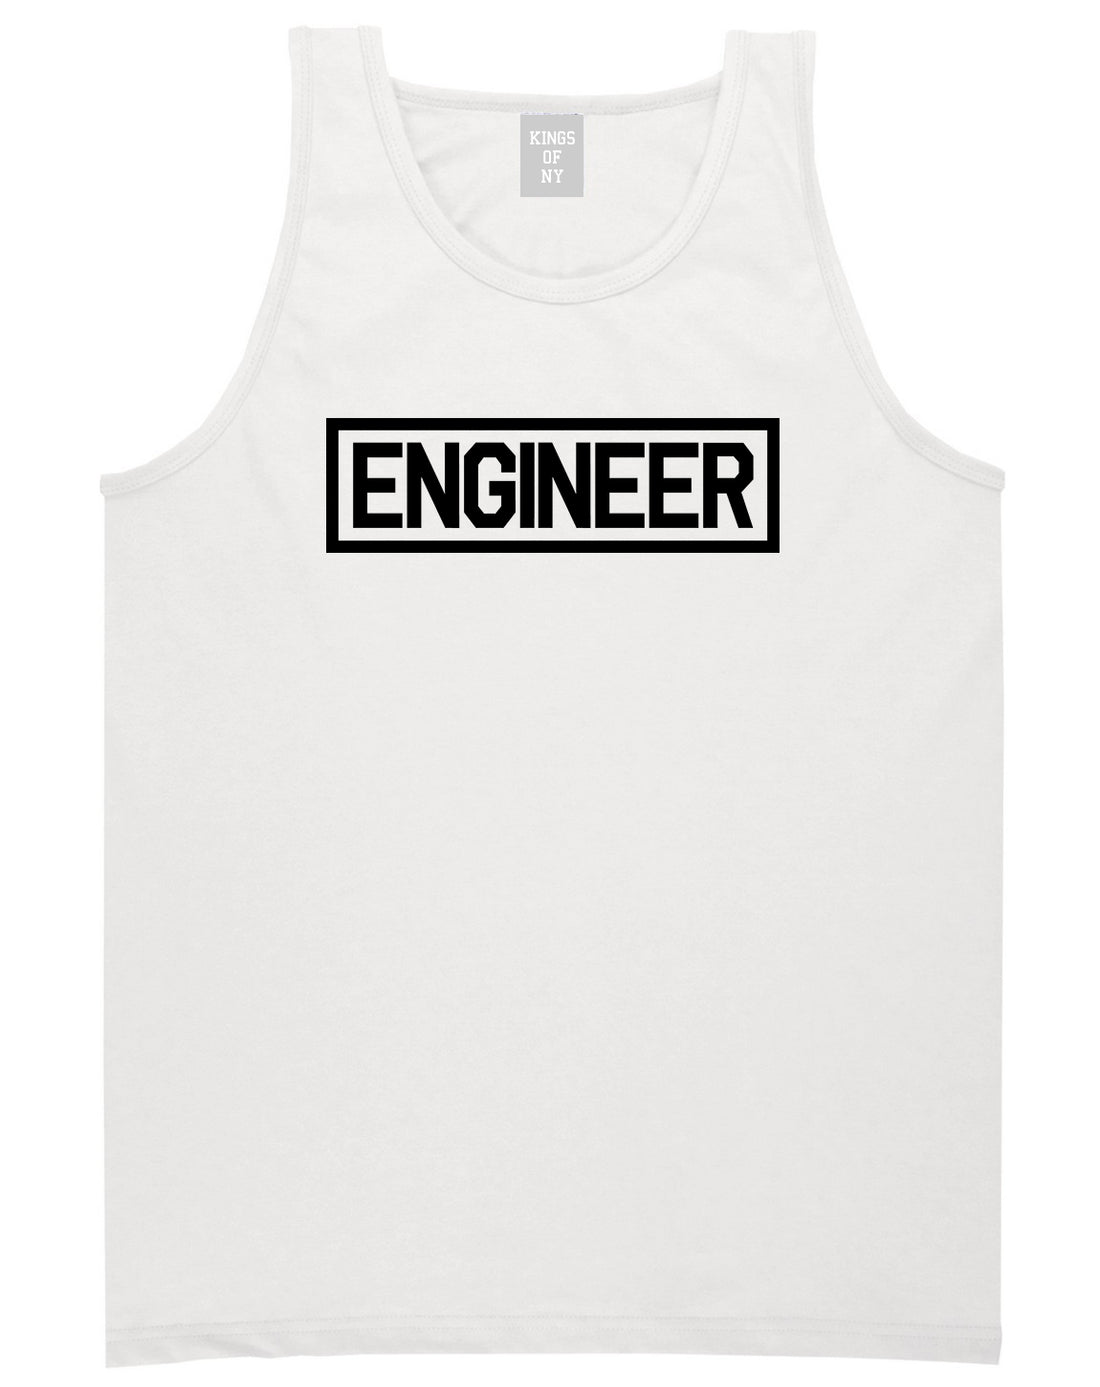 Engineer_Occupation_Job Mens White Tank Top Shirt by Kings Of NY